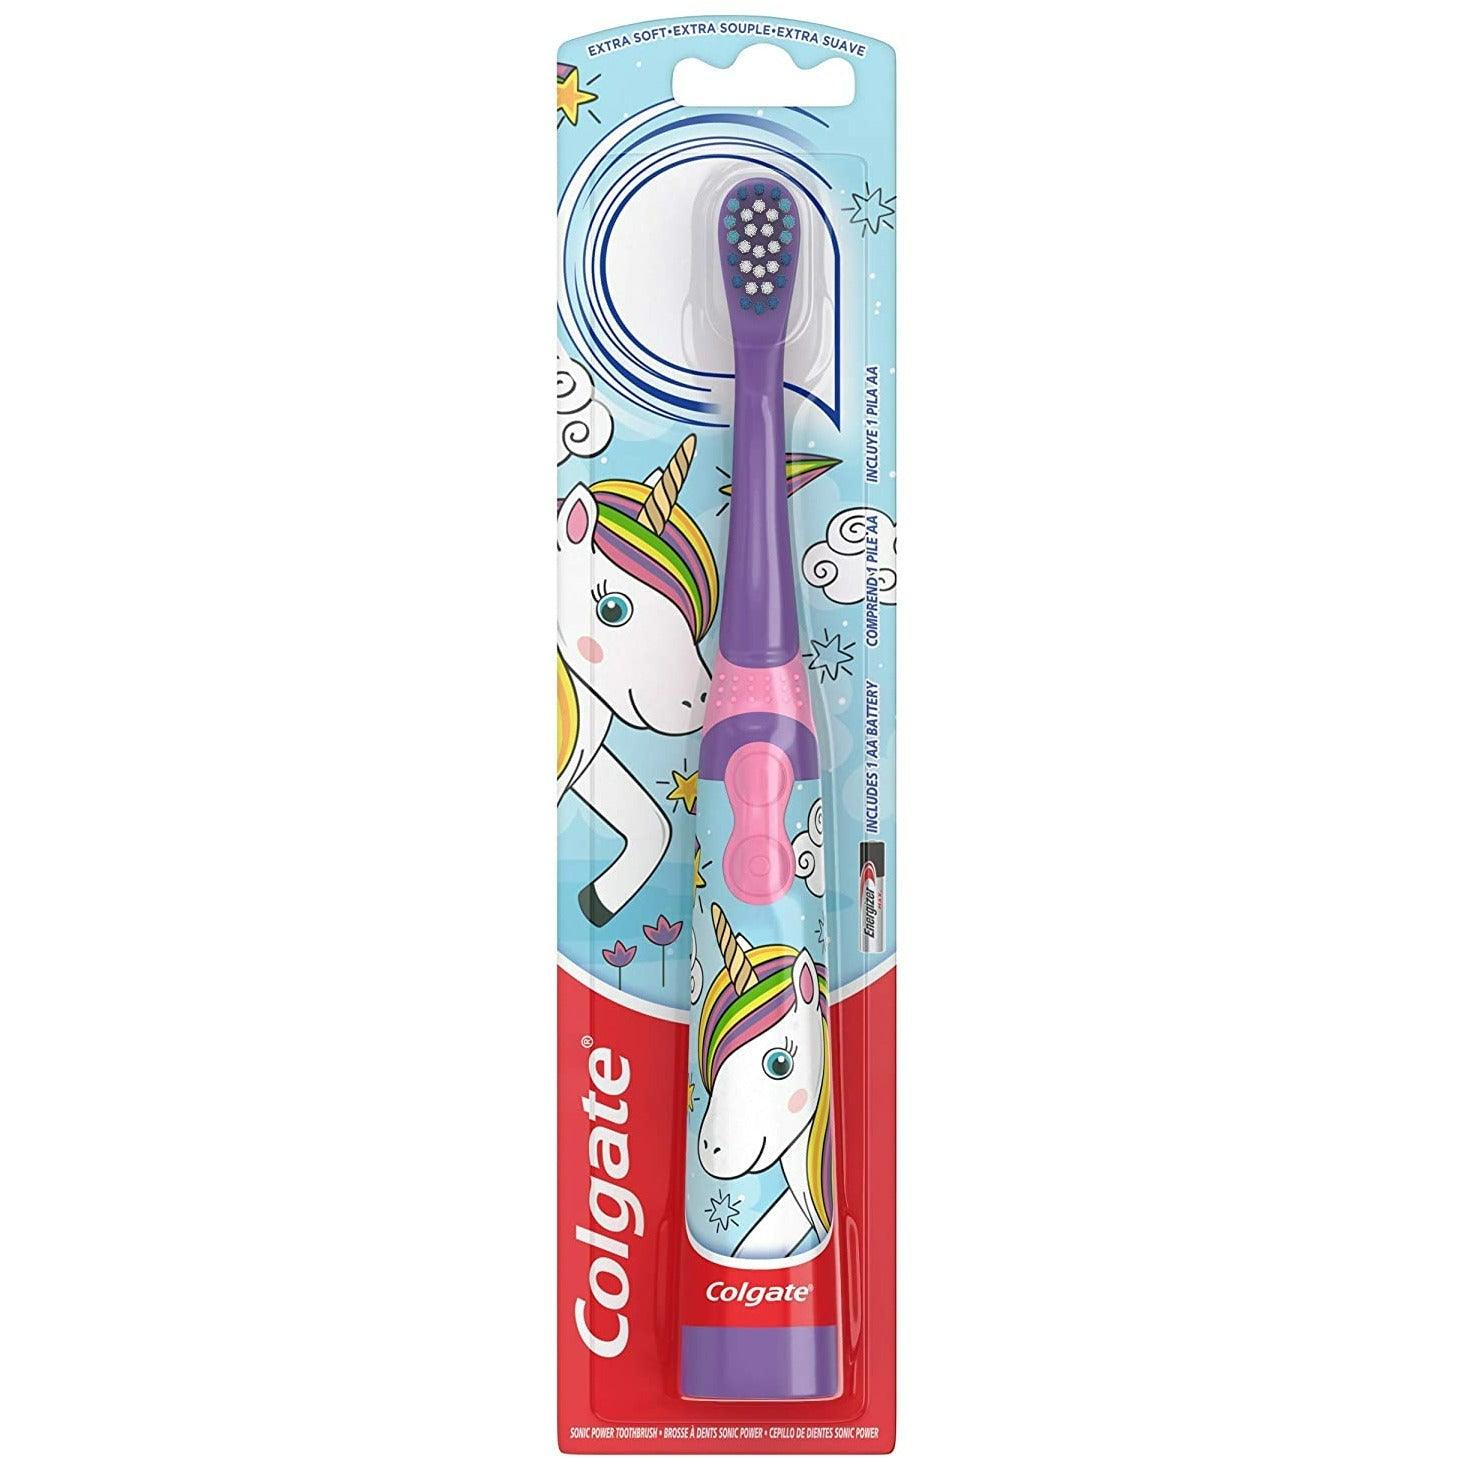 Colgate Kids Electric Battery Powered Toothbrush Extra Soft - Unicorn - BumbleToys - 5-7 Years, Baby Saftey & Health, Girls, Toothbrush, unicorn